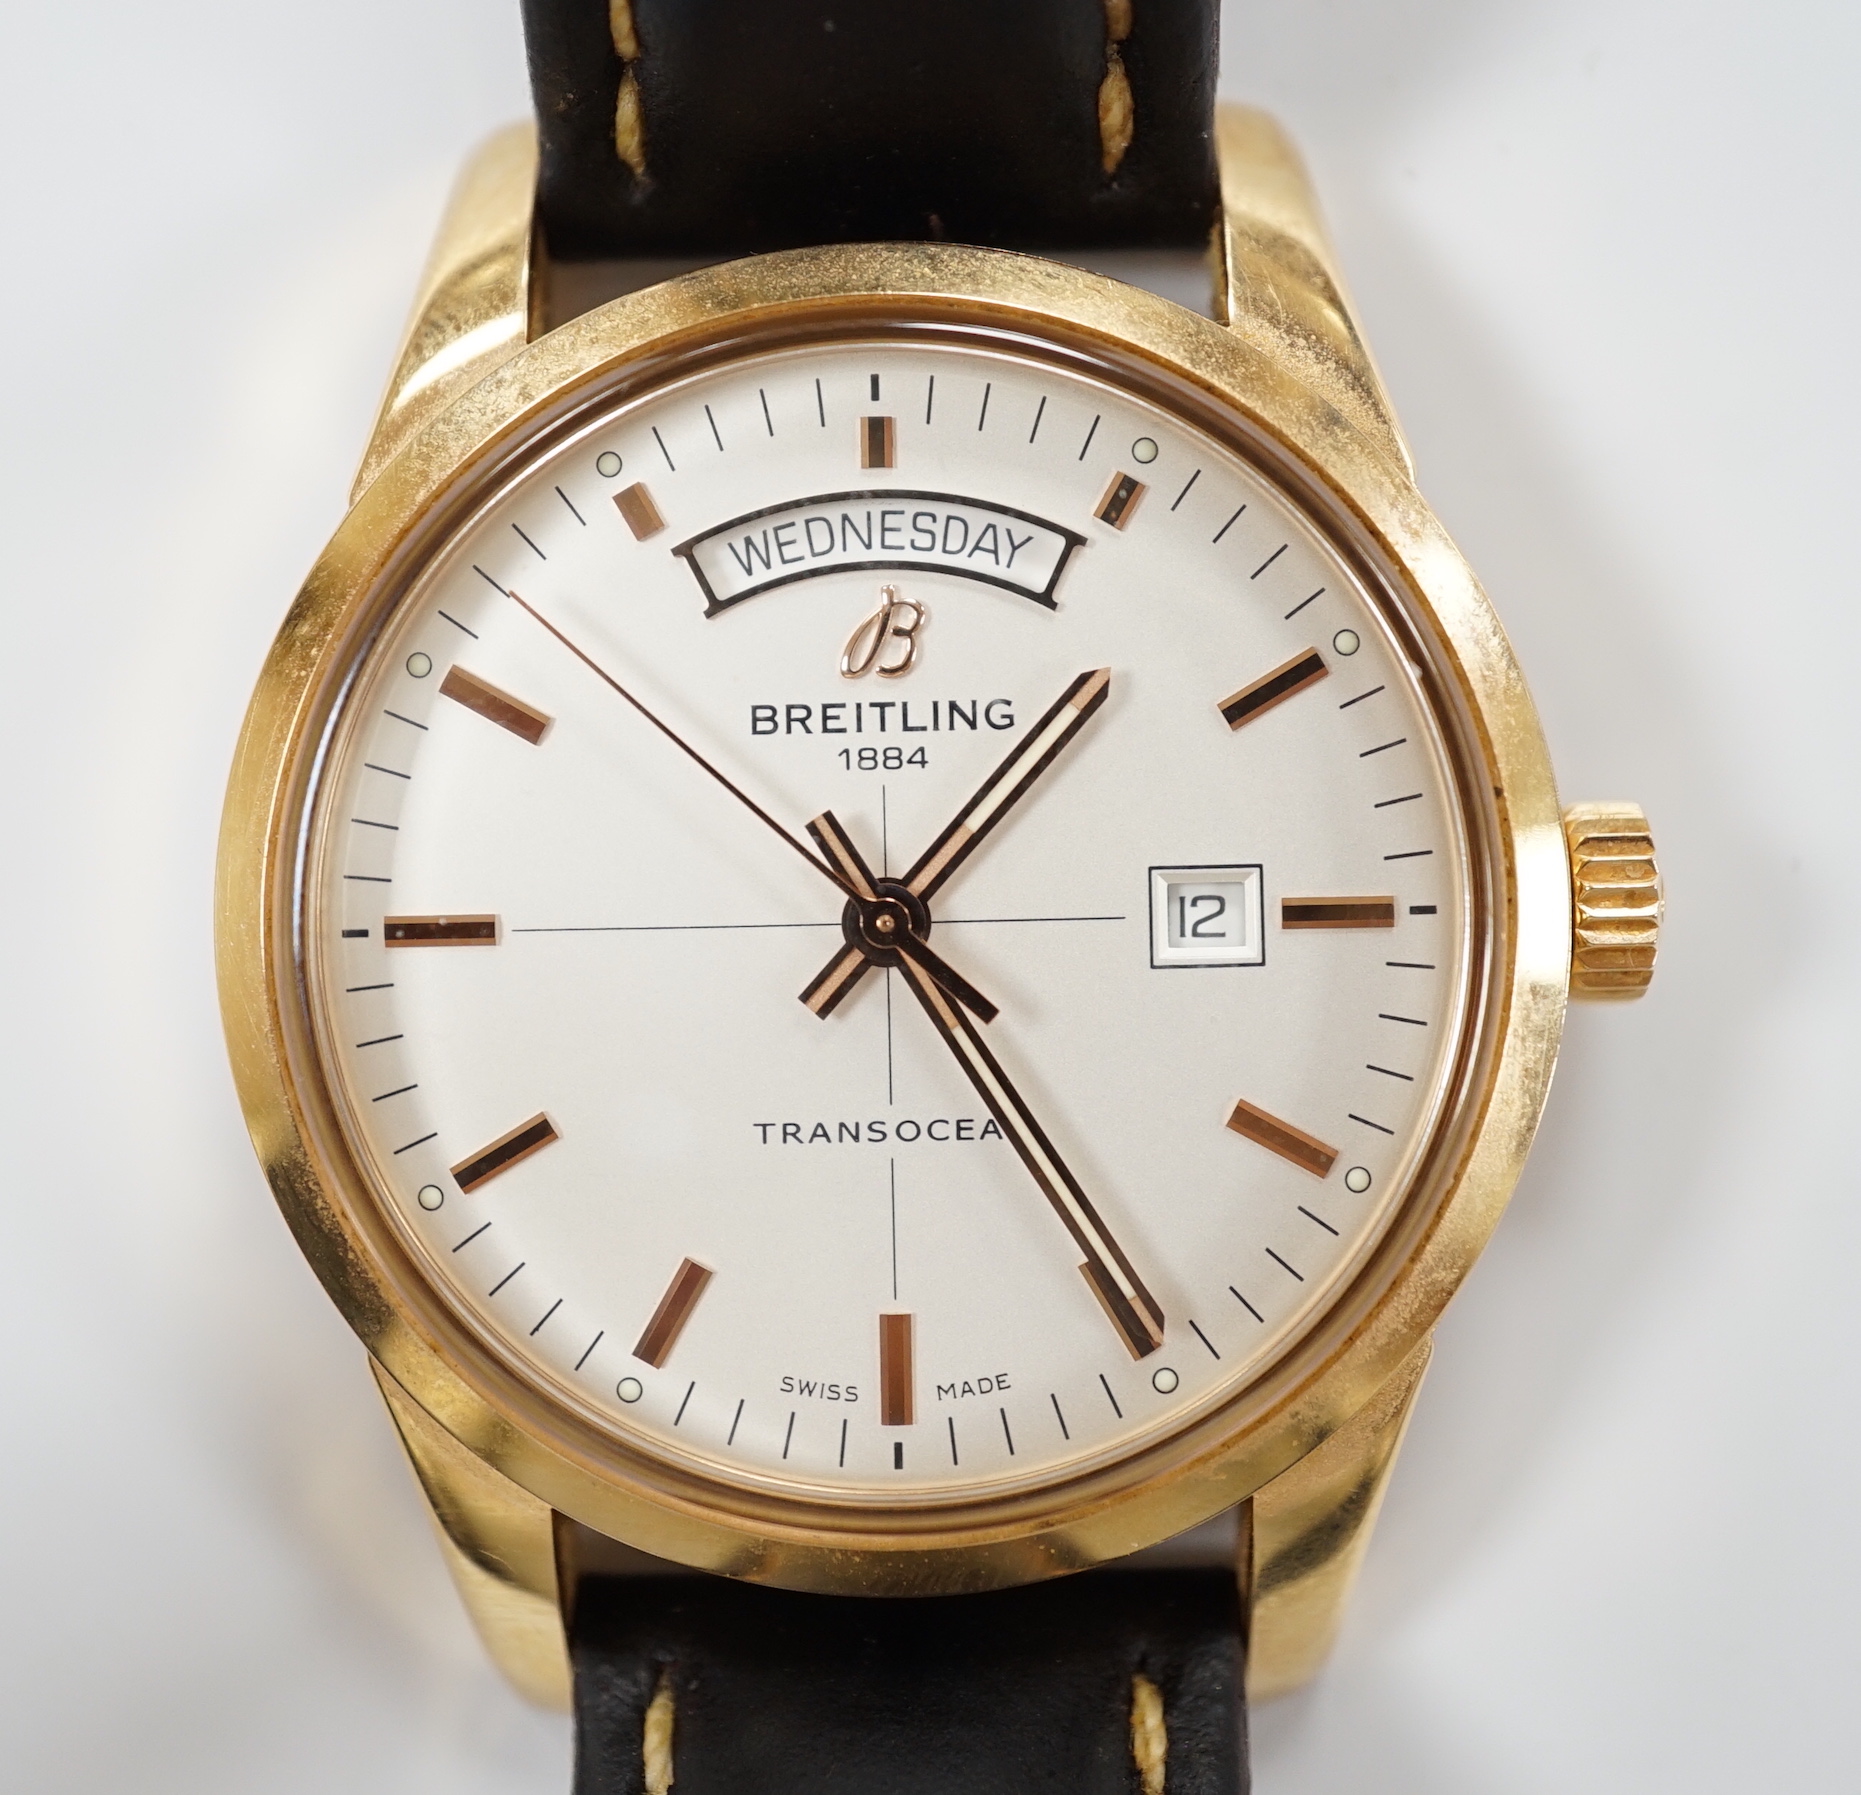 A gentleman's 2013 18ct gold Breitling Transocean automatic day/date wrist watch, with baton numerals, on a Breitling leather strap with 18ct gold Breitling buckle, the case back numbered R45310, No. 198, case diameter 4